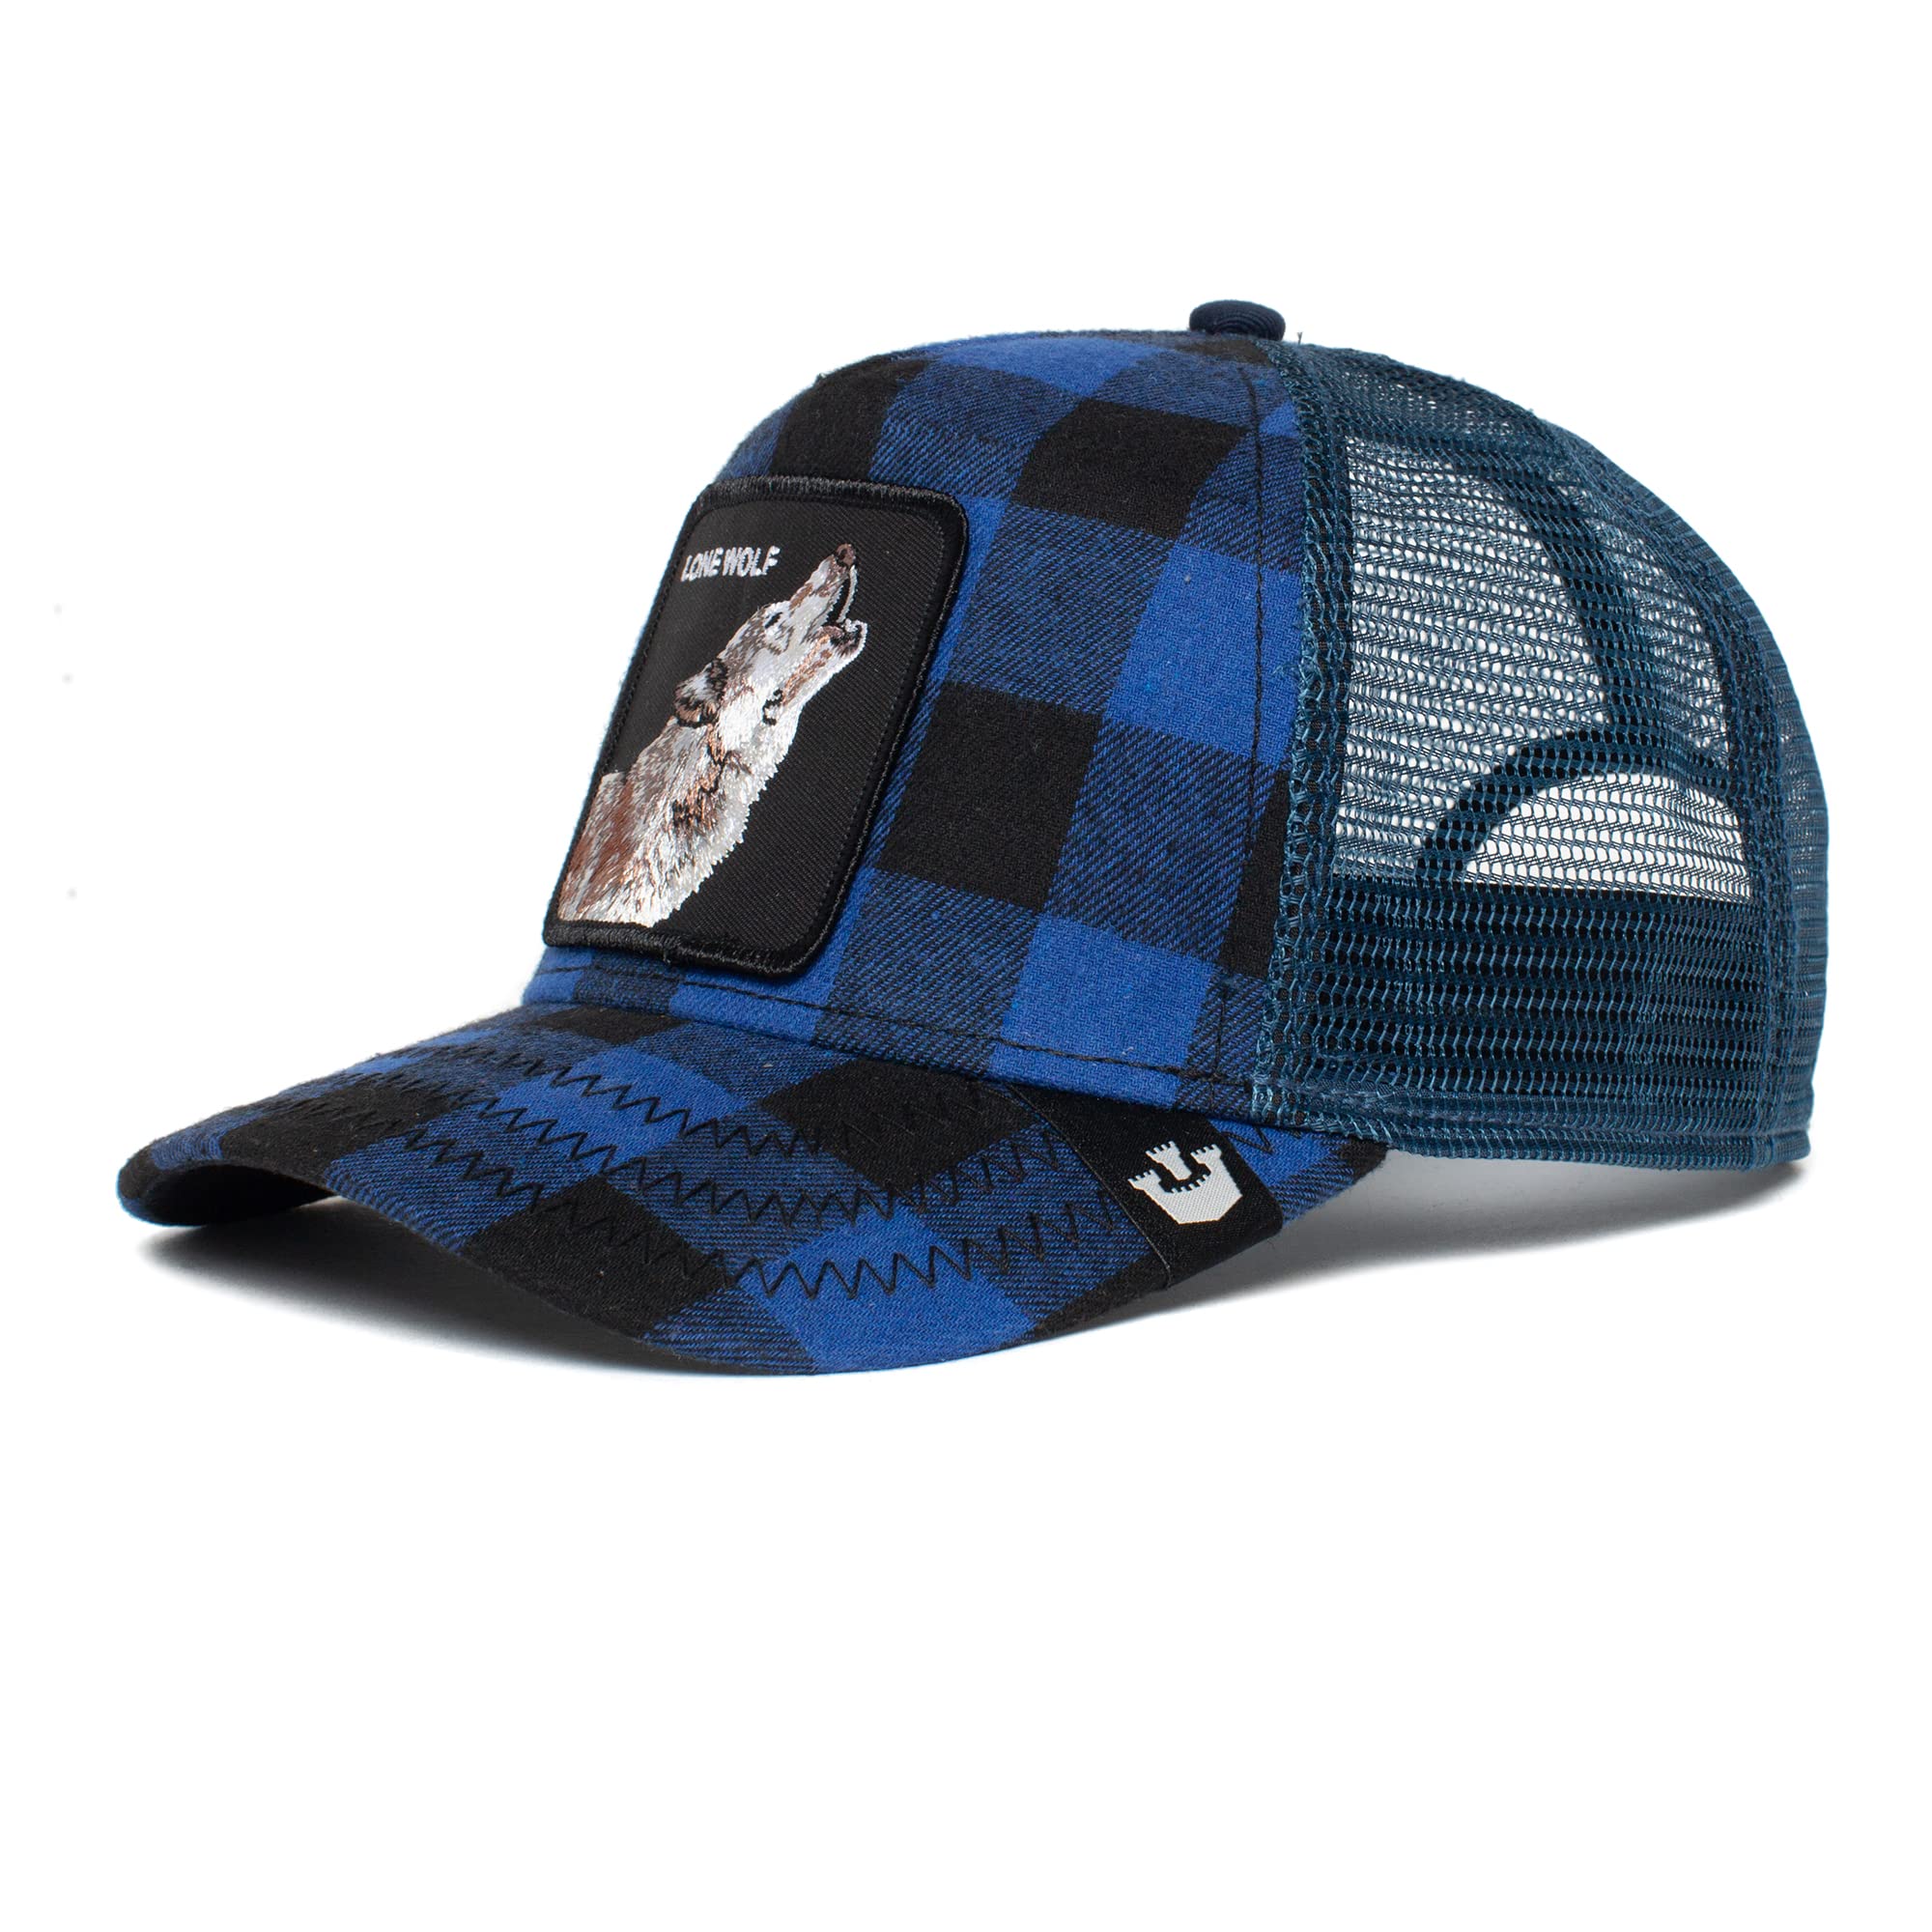 Goorin Bros. Trucker Cap Code Blue Lone Wolf Blue Black, Blue, One Size - Caps Fitted Caps Fitted Goorin Bros.